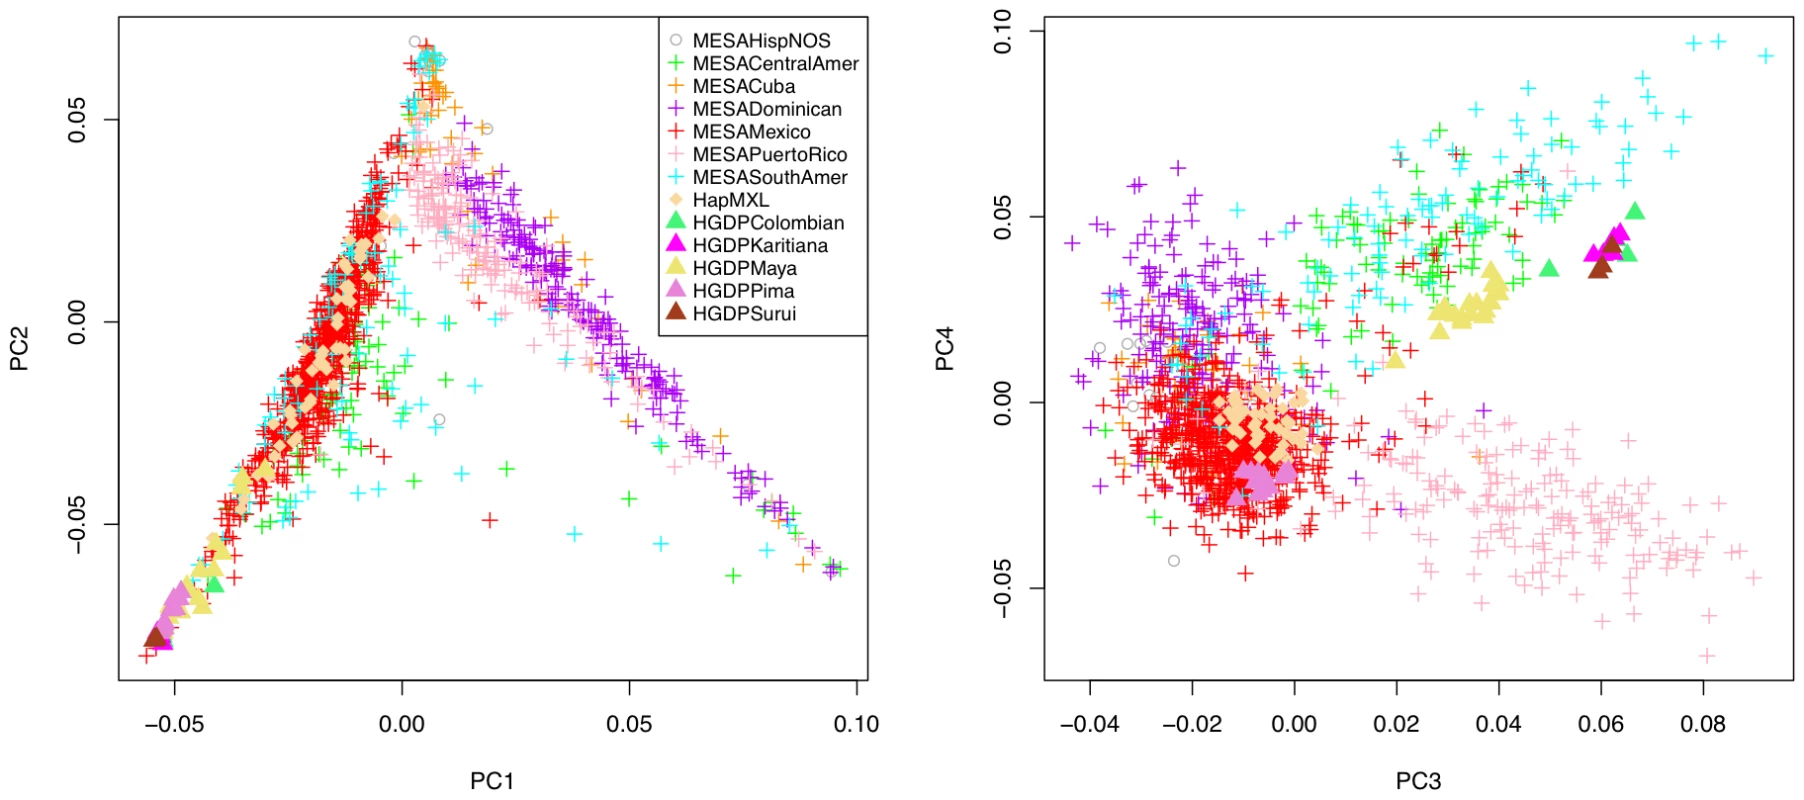 Principal component analysis of 1,374 unrelated individuals of self-reported Hispanic origin from the Multi-Ethnic Study of Atherosclerosis (MESA), displayed by country/region of origin, with projection to key reference populations.